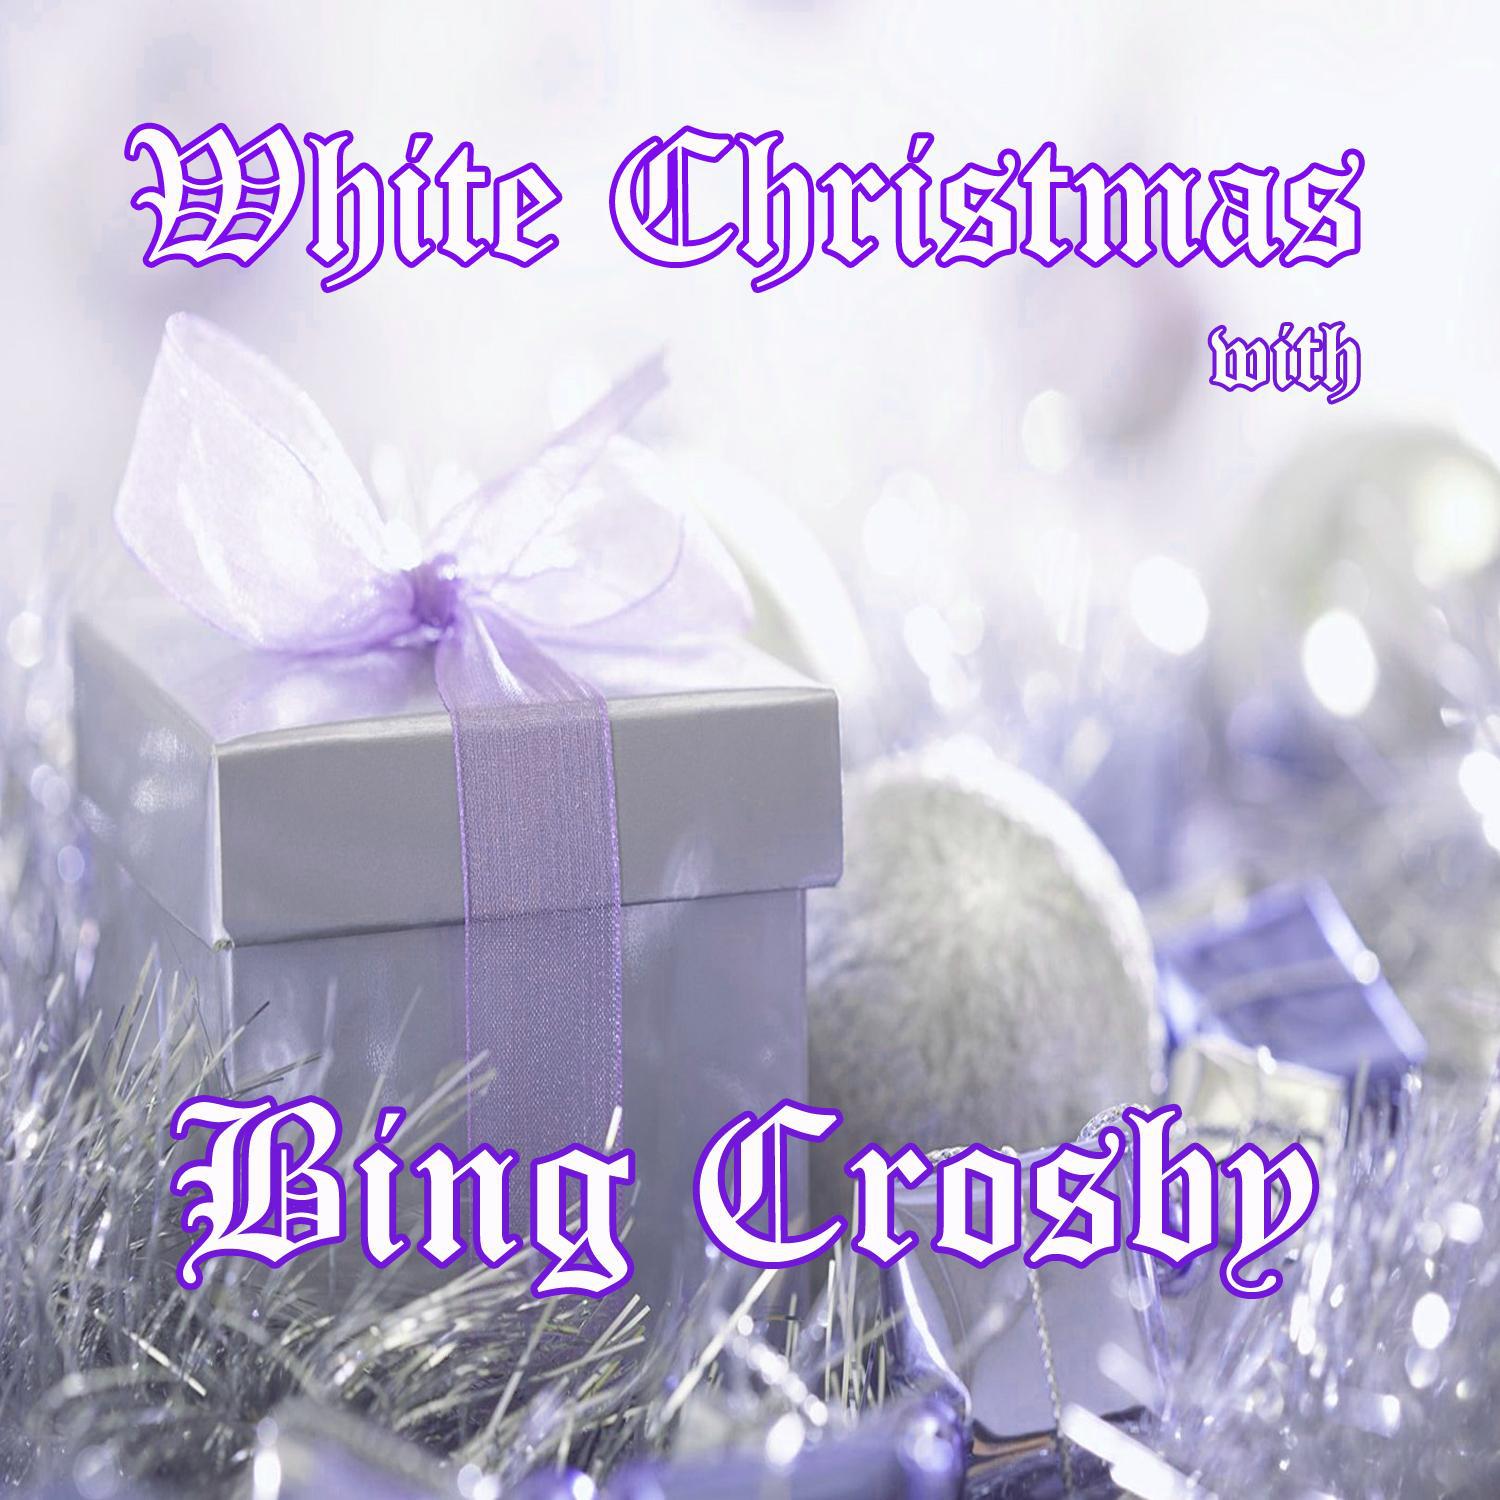 White Christmas with Bing Crosby